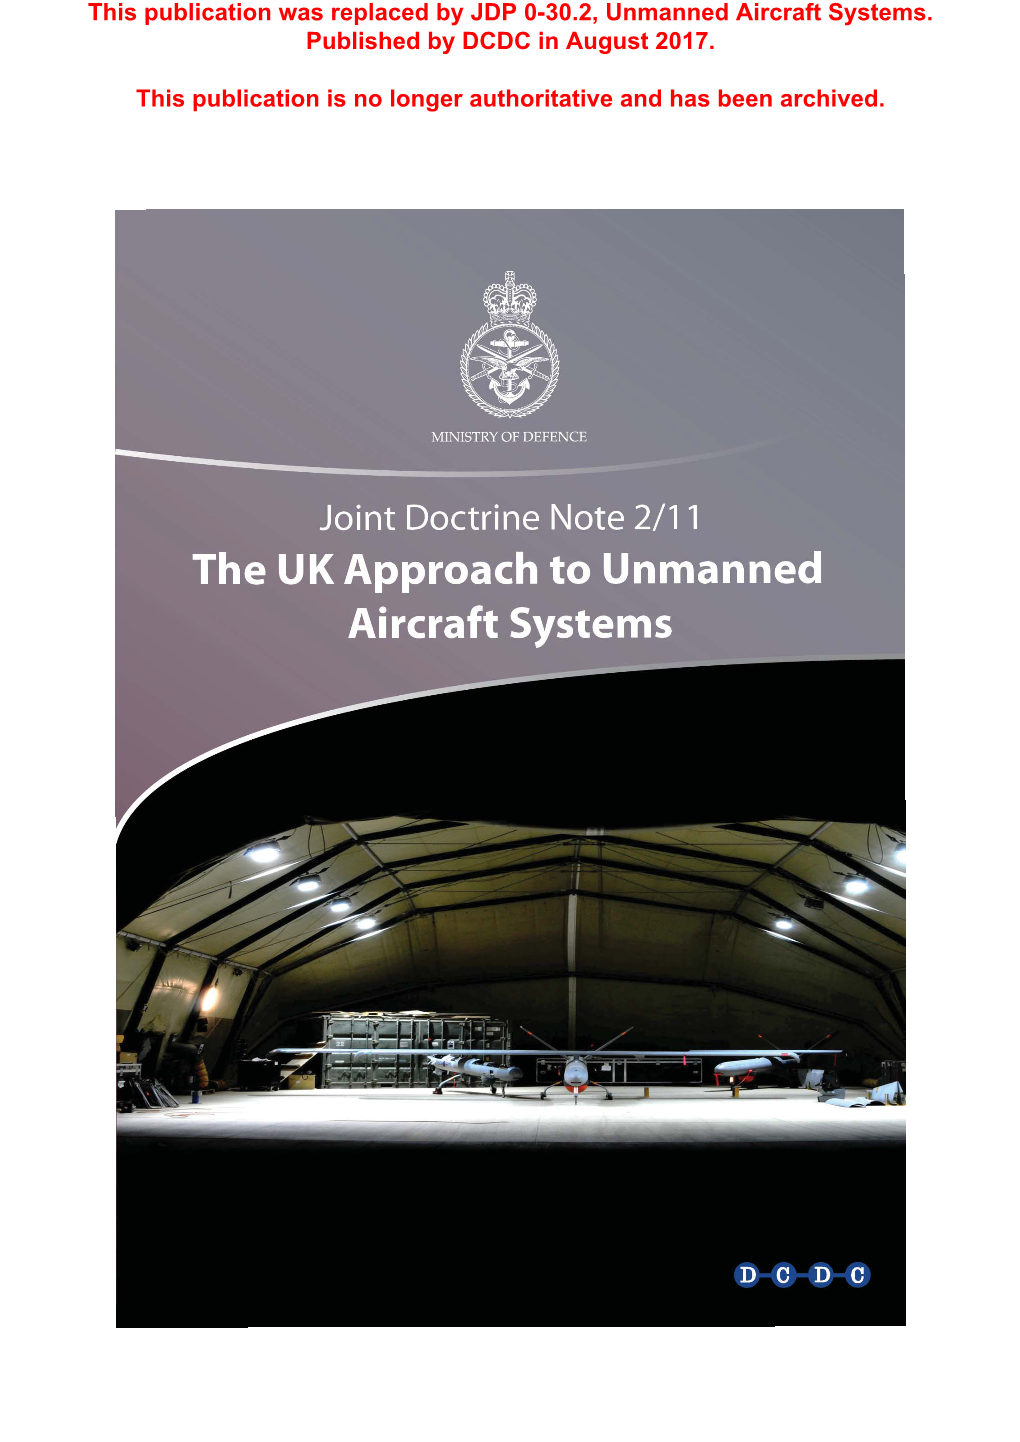 Why Unmanned Aircraft?’, Is a Key Element of the Document, Together with Chapter 5, Which Covers Legal, Moral and Ethical Issues